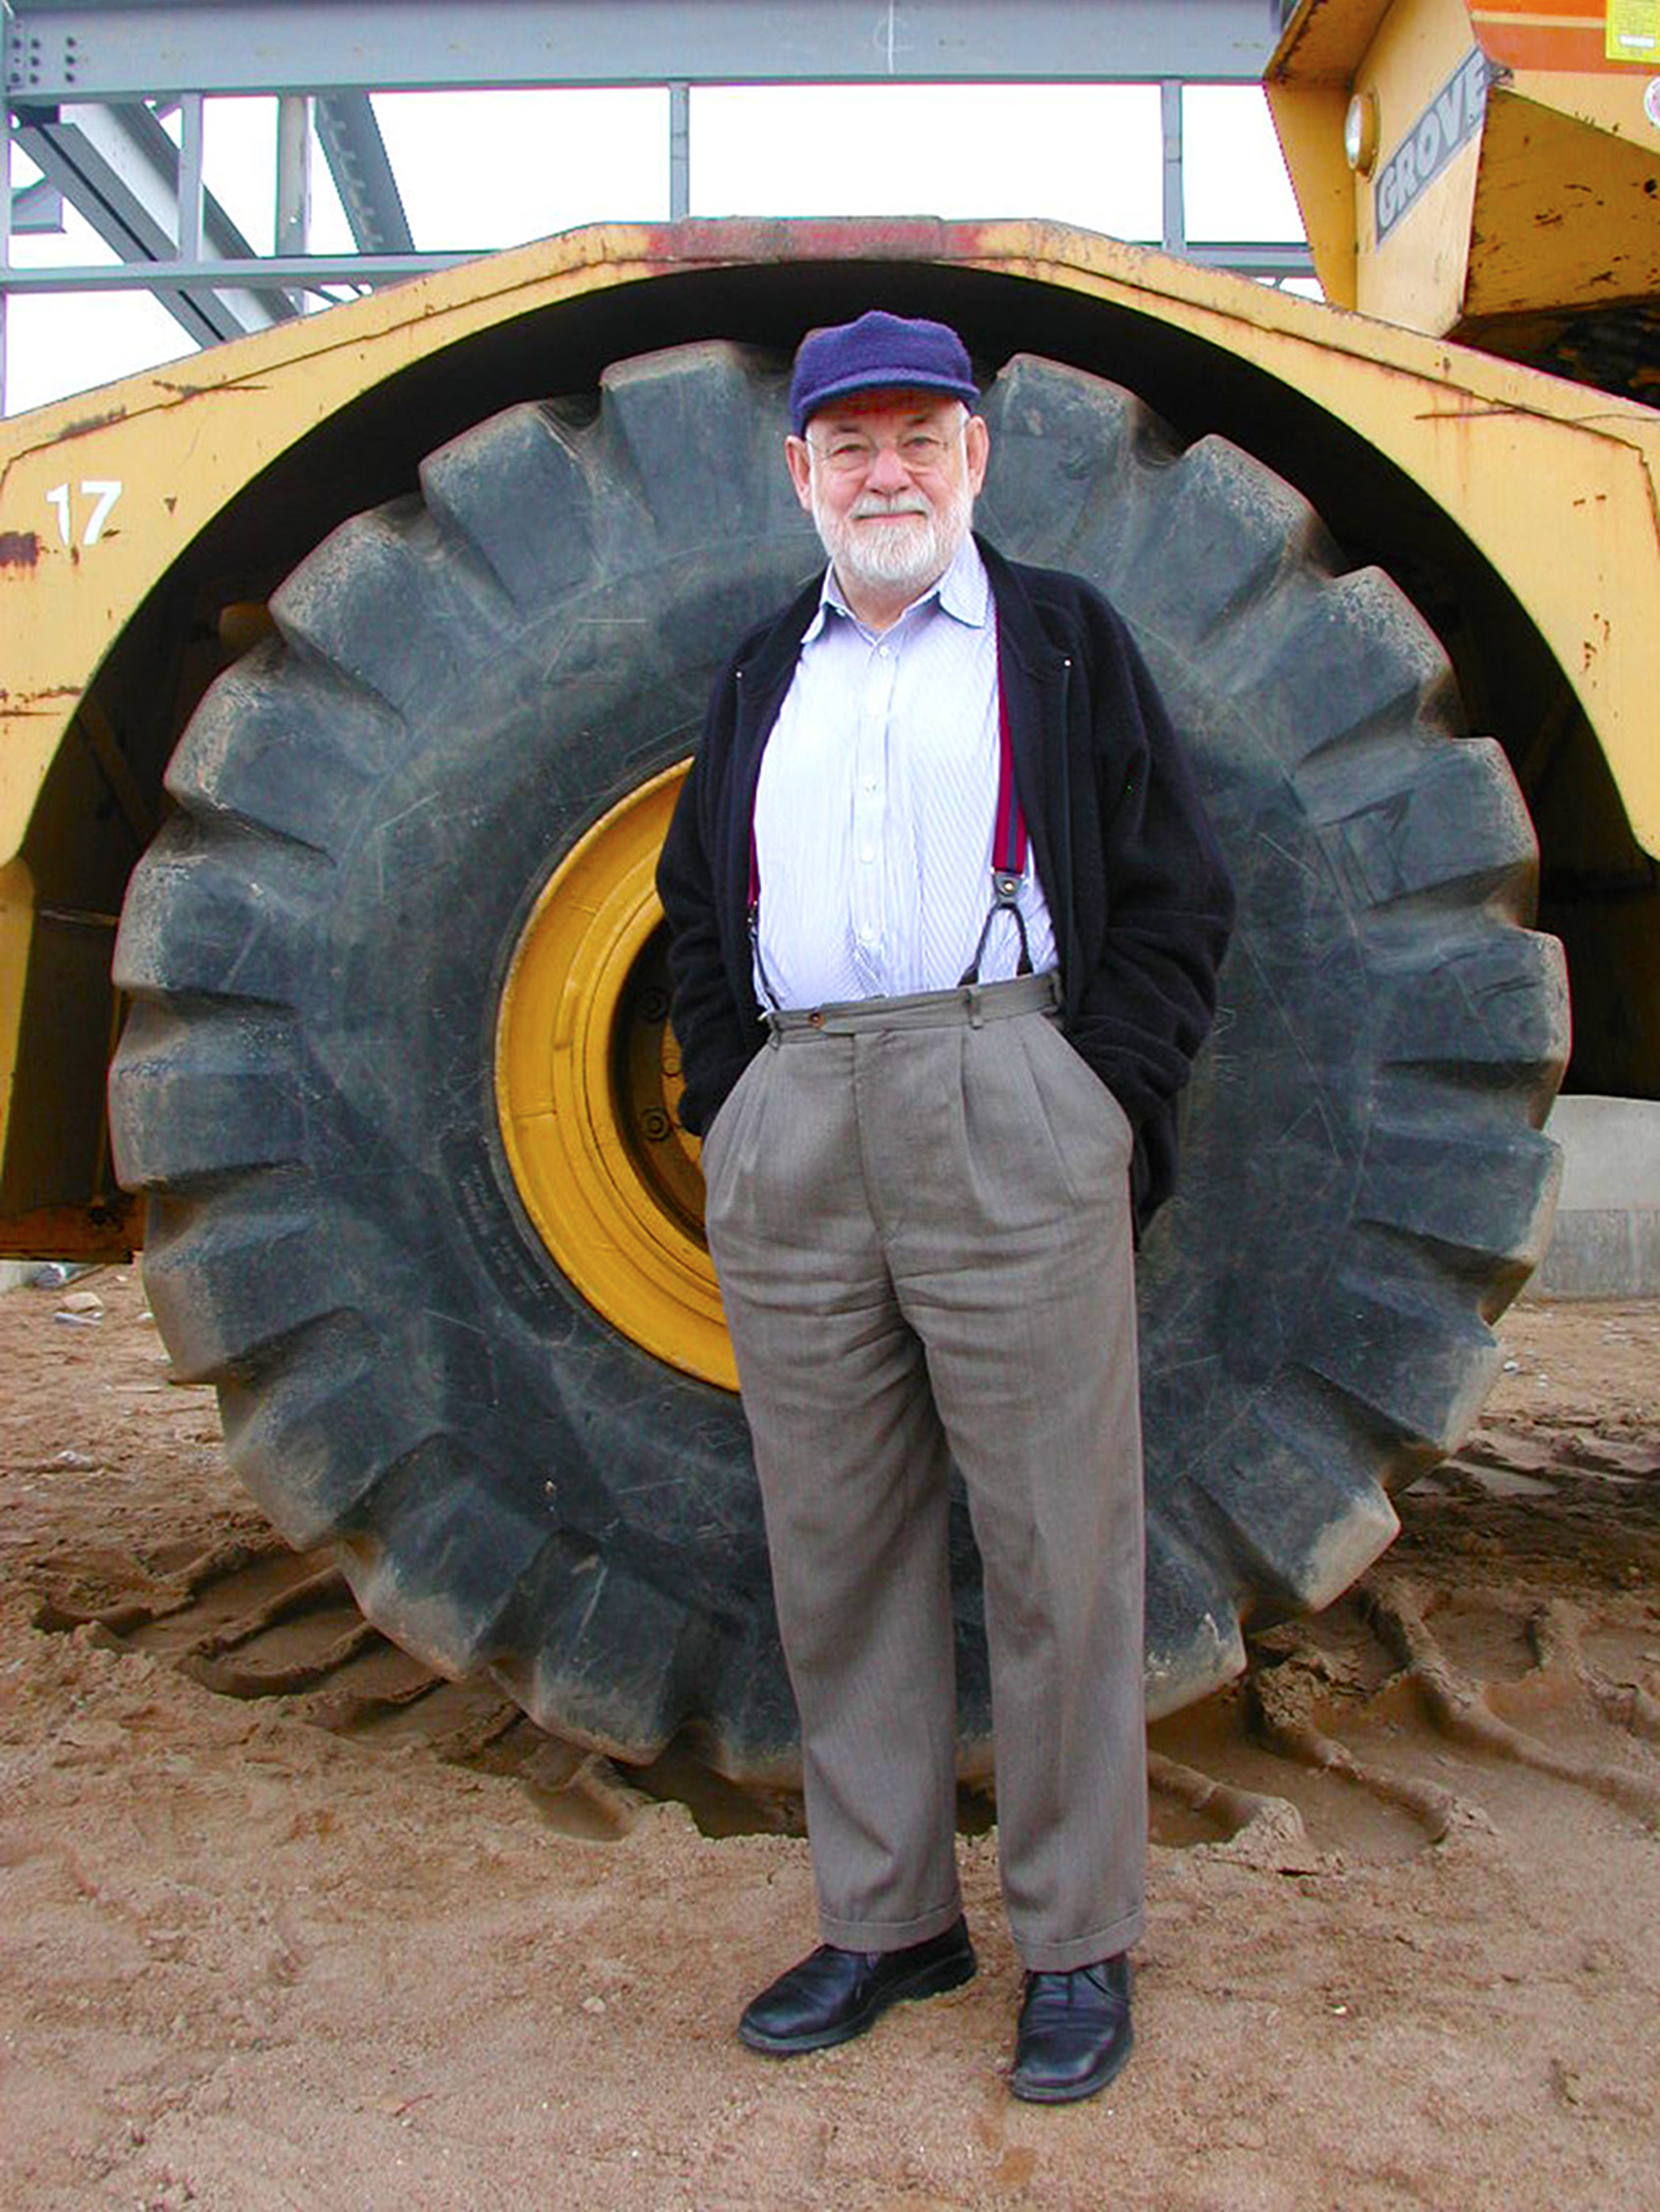 Eric Carle infront of a large construction vehicle wheel, which is as tall as he is